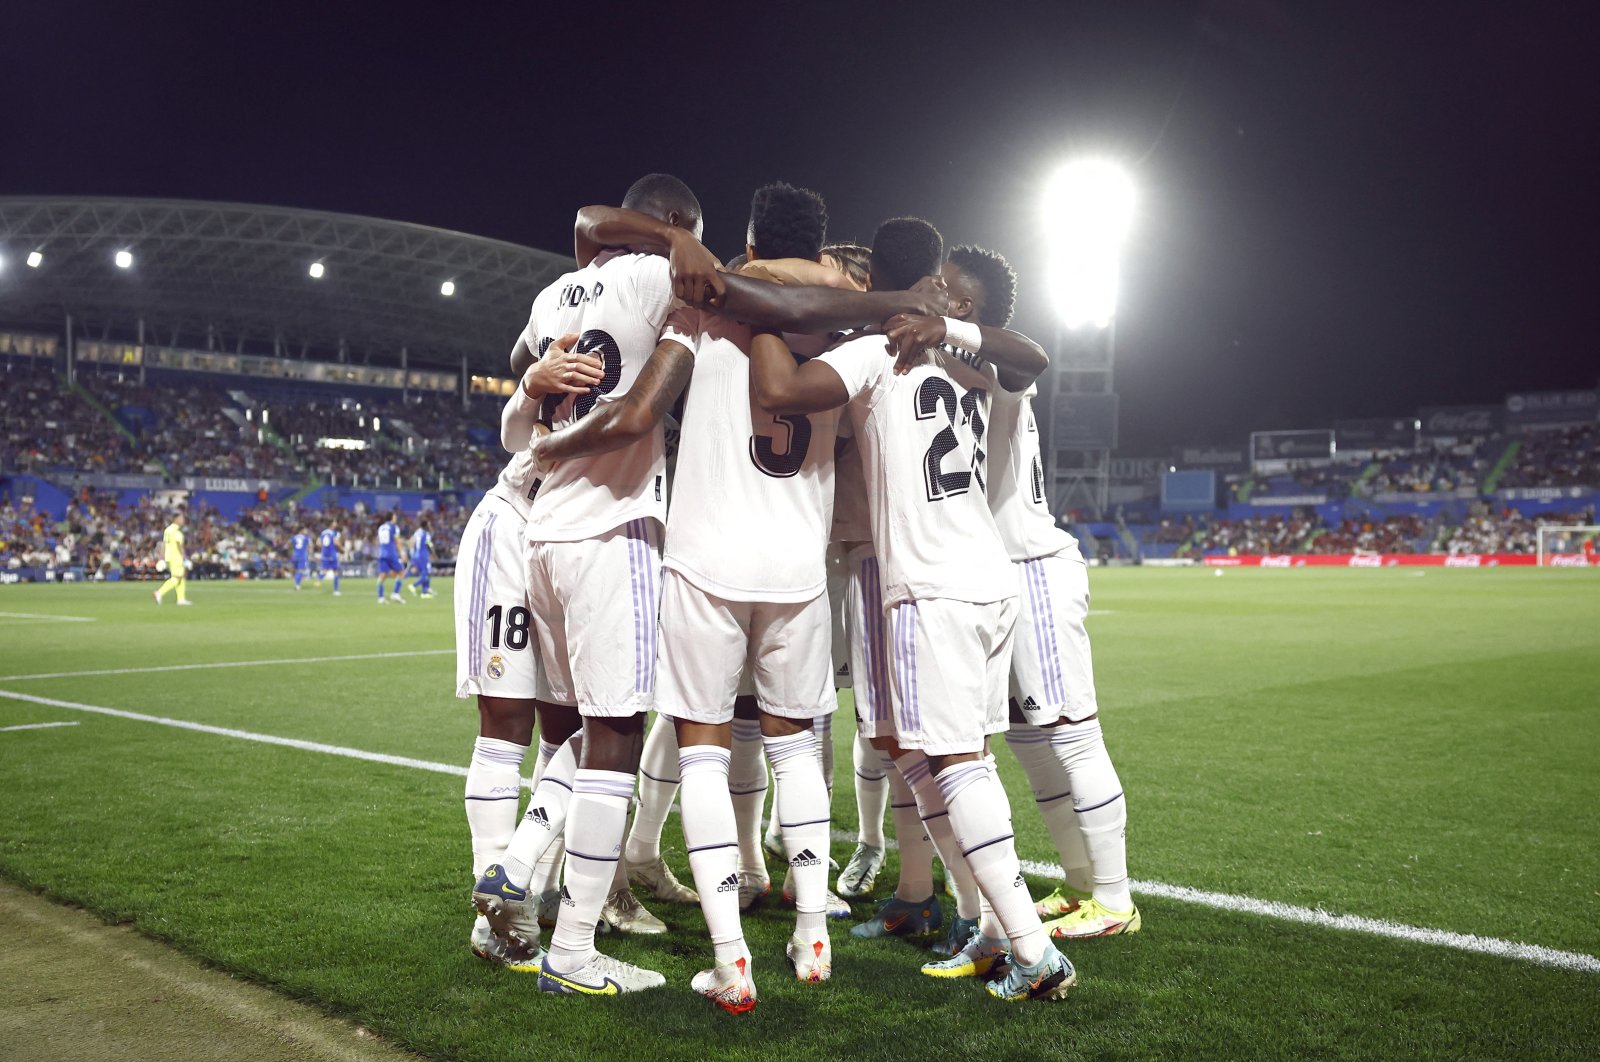 Real Madrid&#039;s Eder Militao celebrates scoring their first goal with teammates against Getafe, Getafe, Spain, Oct. 8, 2022. (Reuters Photo)